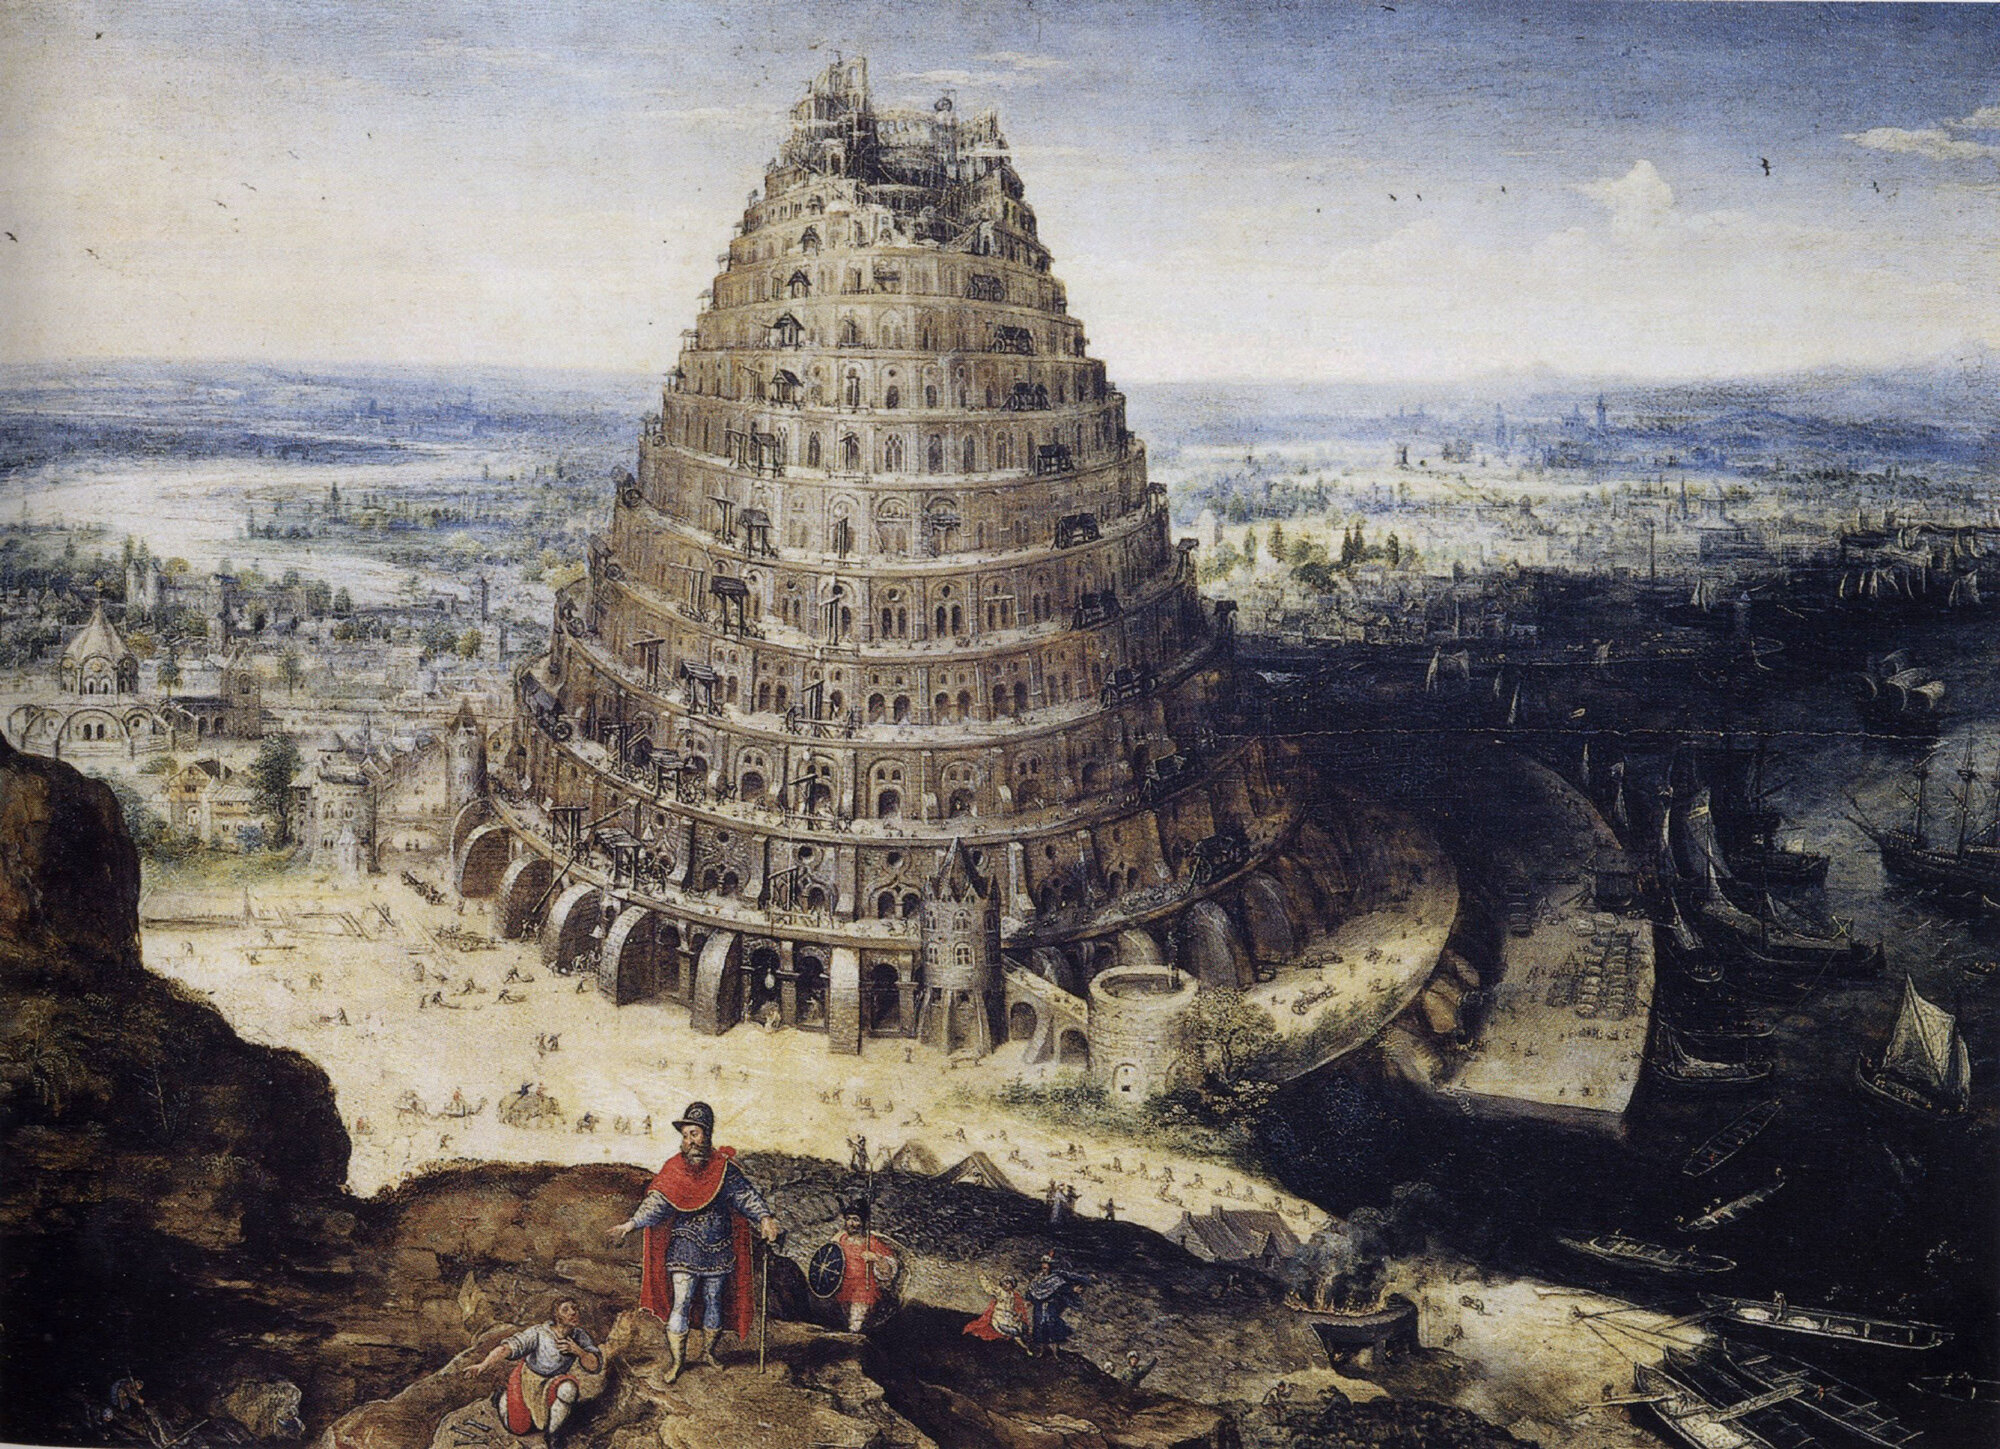 Lucas van Valckenborch’s 1594 painting Tower of Babel, showing the tower as a ziggurat-like structure, with concentric flat terraces. The tower is shown in the midst of construction, with the upper levels incomplete.